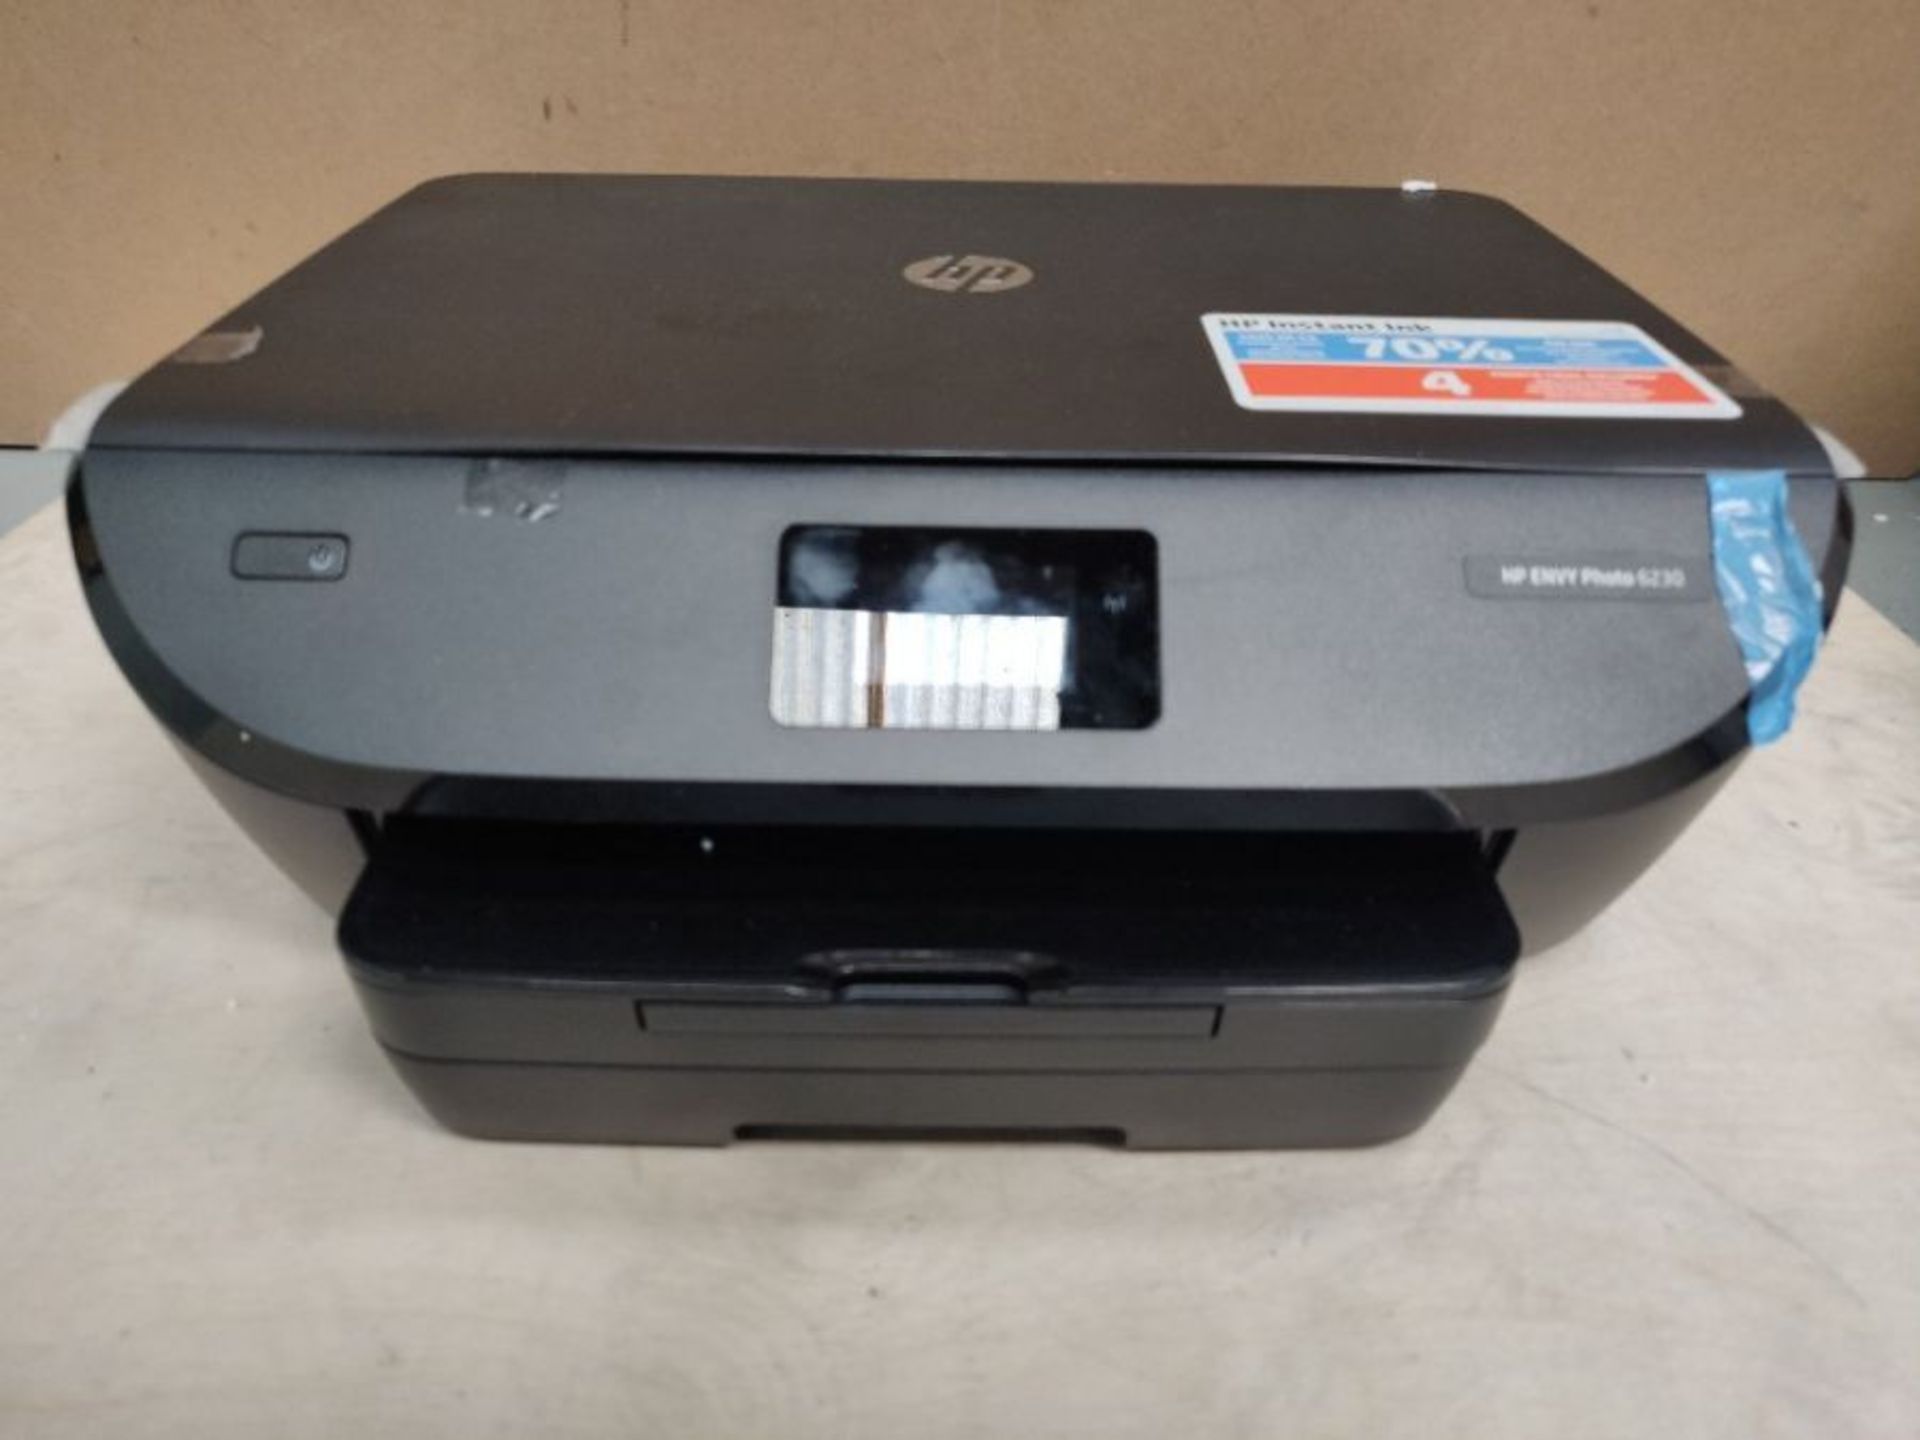 RRP £84.00 HP Envy Photo 6230 All-in-One Wi-Fi Photo Printer with 4 Months of Instant Ink Include - Image 3 of 3